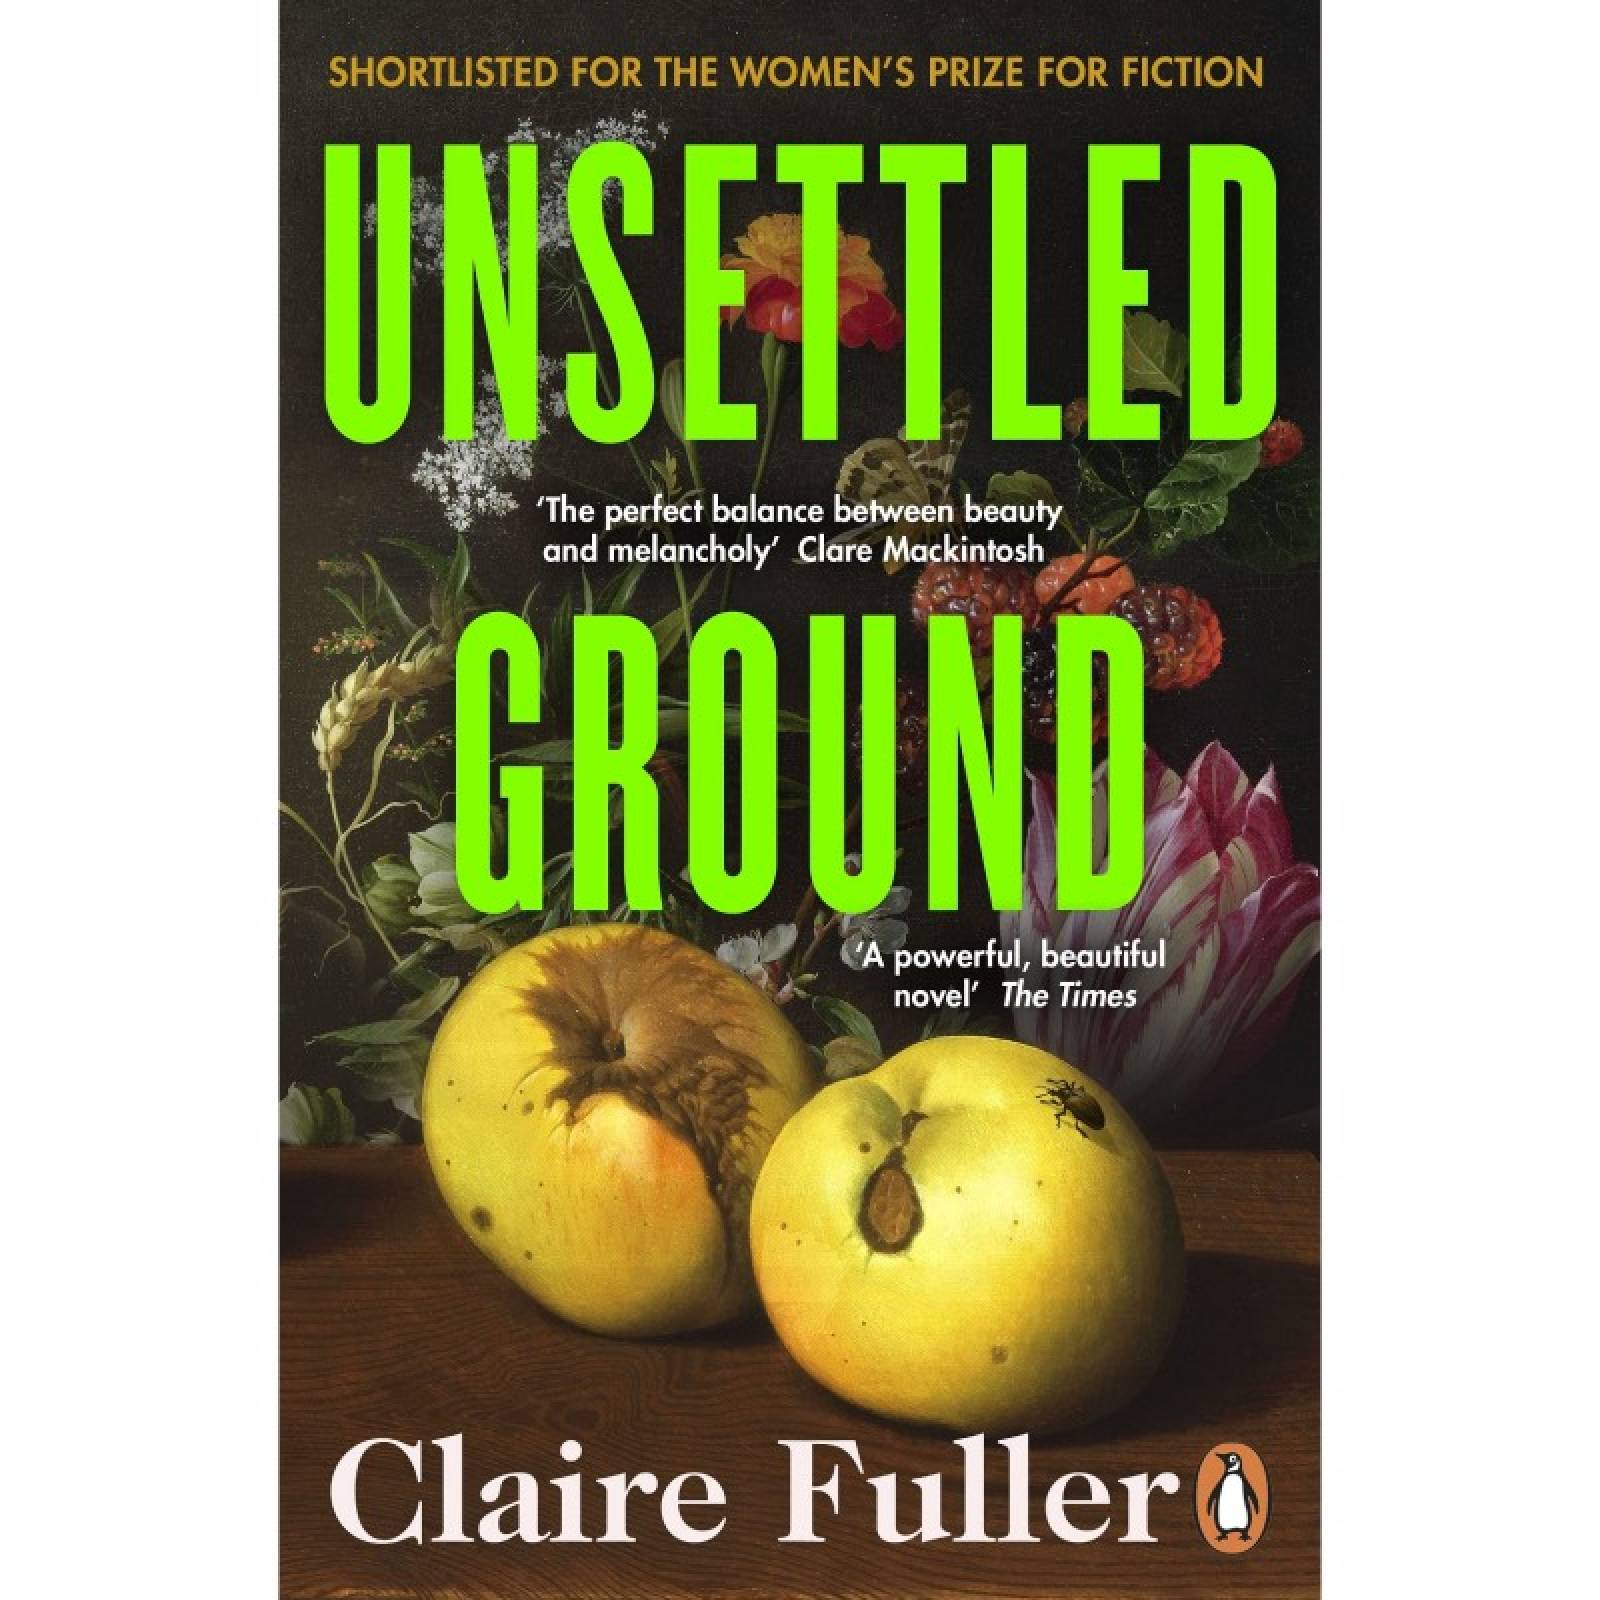 book reviews of unsettled ground by claire fuller